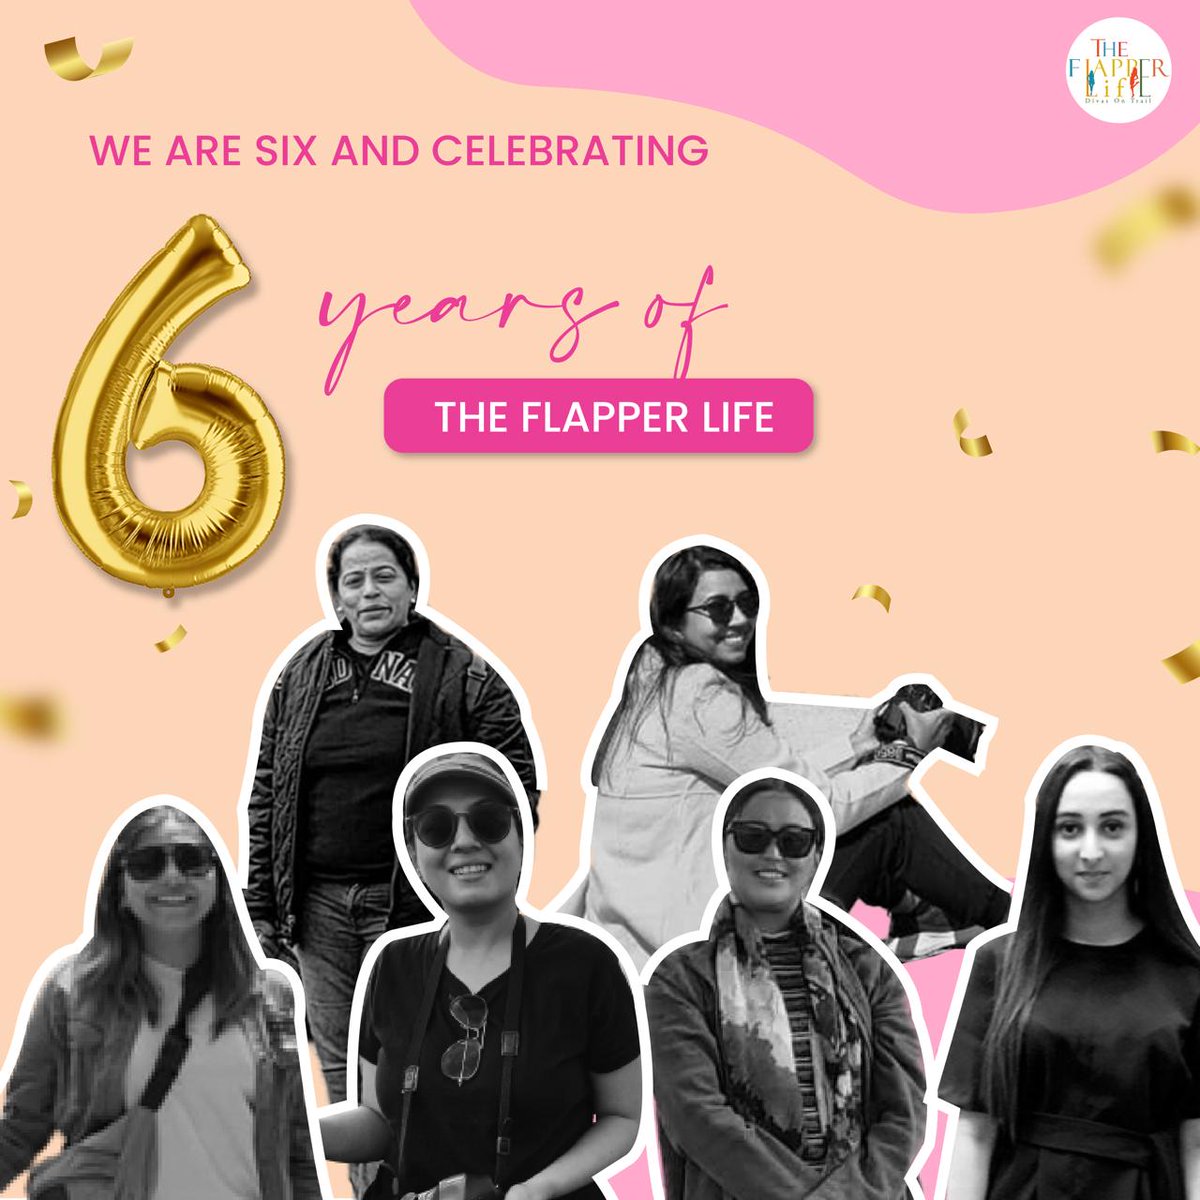 𝗧𝗙𝗟 𝘁𝘂𝗿𝗻𝘀 𝗦𝗜𝗫 ! 

Practically we are 6 years old today but emotionally we want to be 4 years old ! 

The celebrations have just begun. There is lots to celebrate and share, So #StayTuned for more updates. Happy 6 Flappers❤️

#theflapperlife #TFLAnniversary #Happy6tous